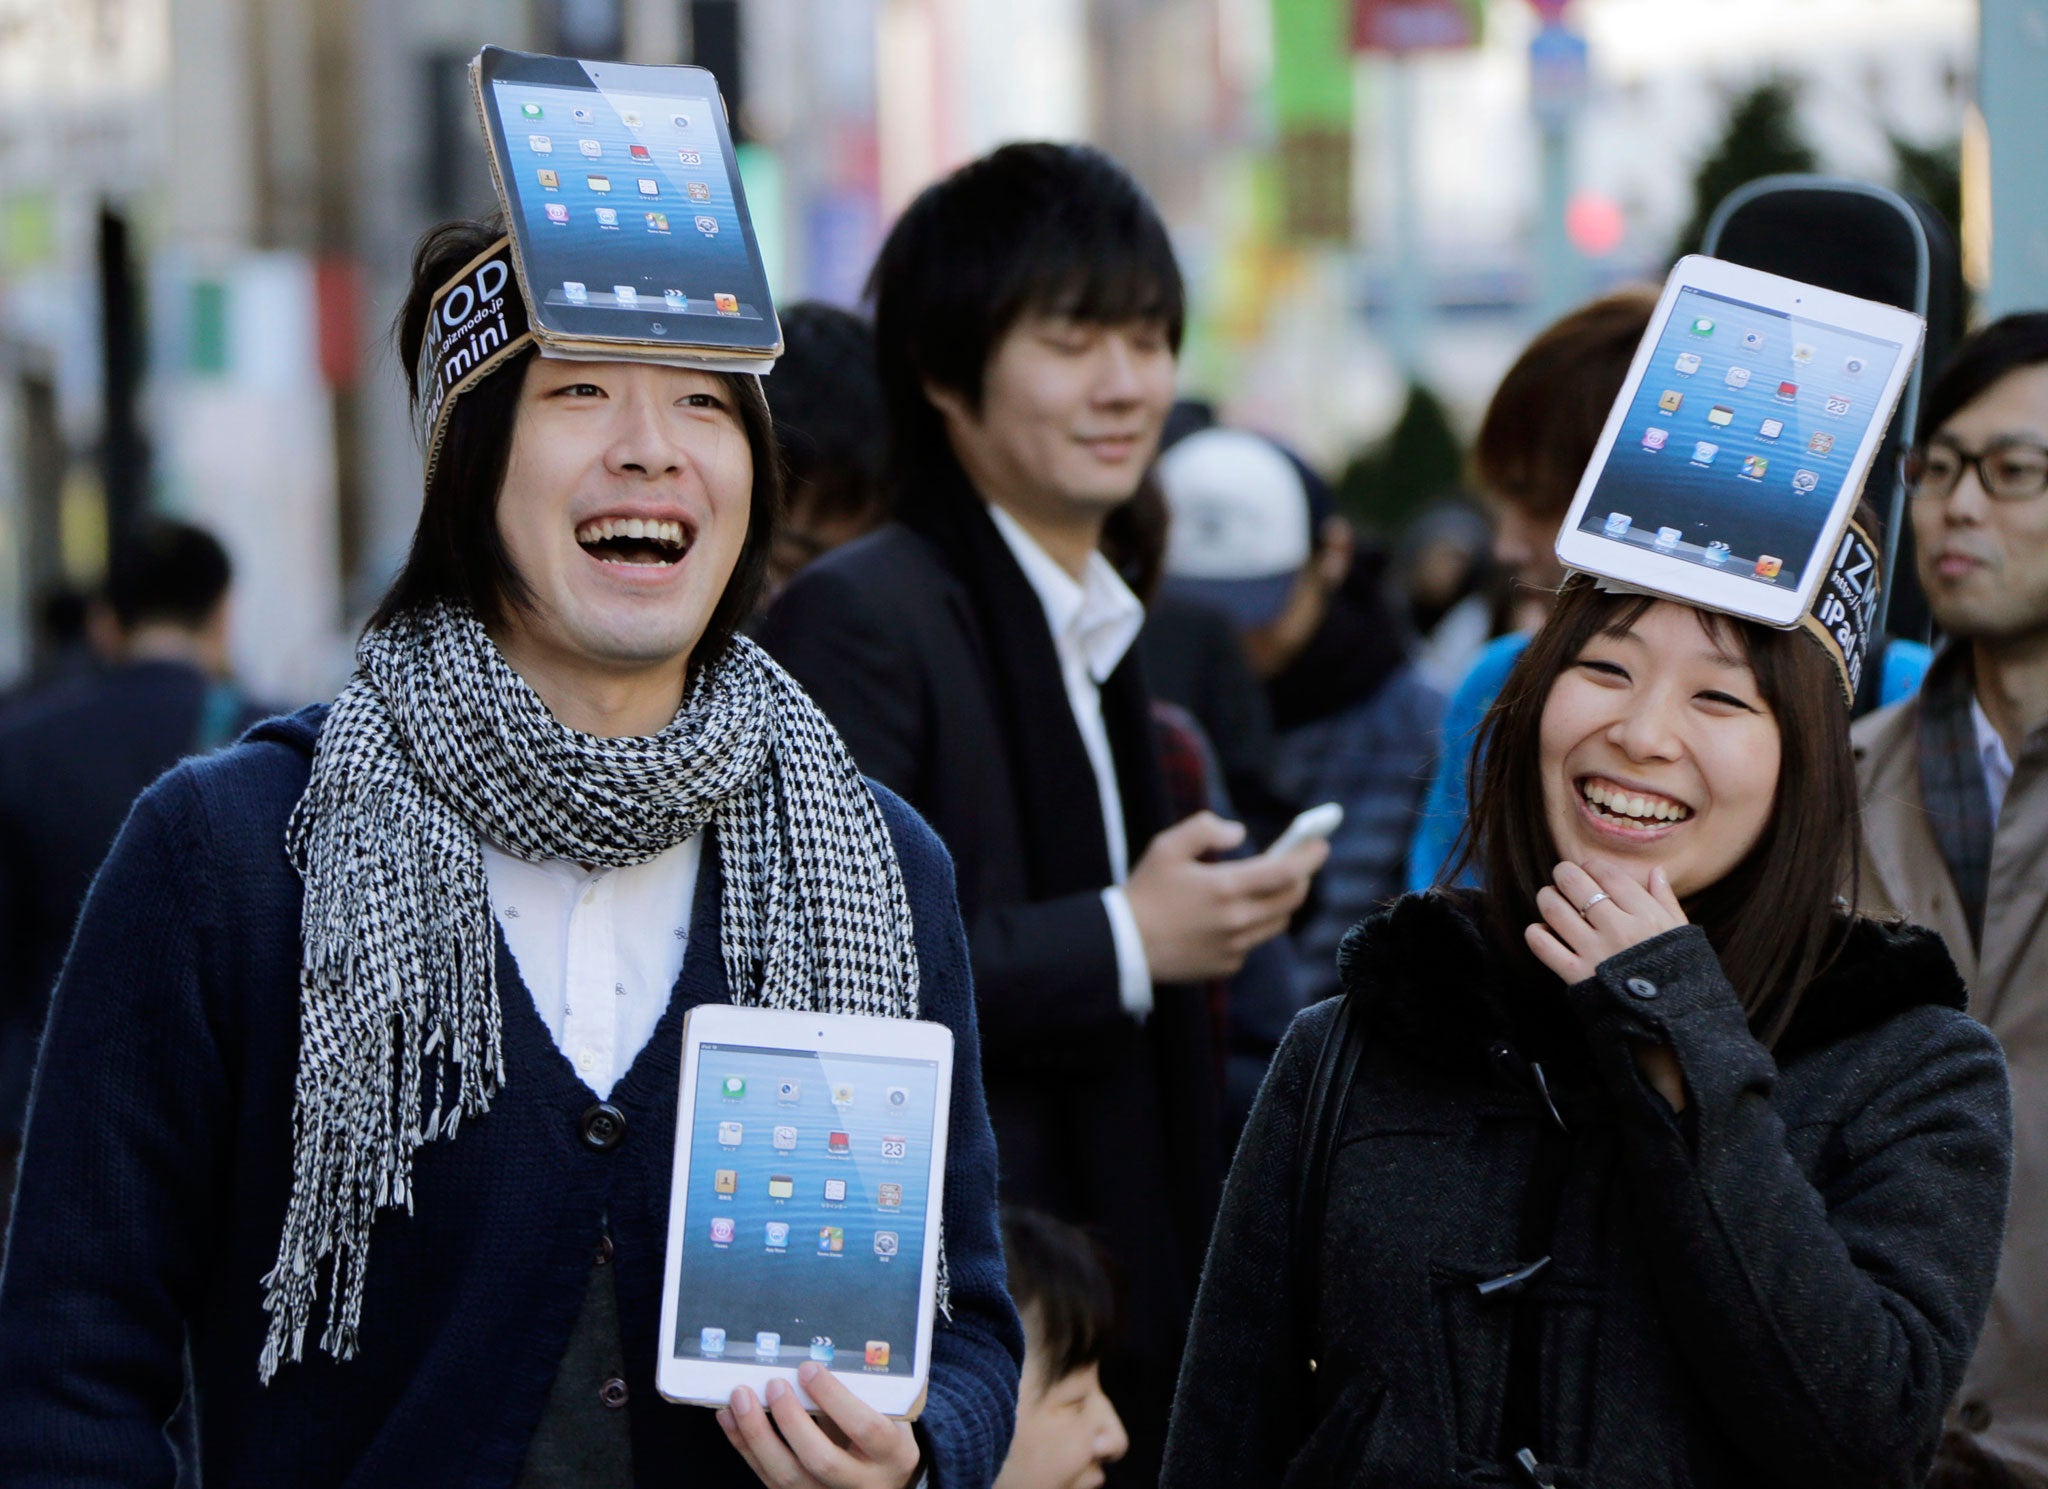 Satisfied Tokyo customers with their new iPad Minis